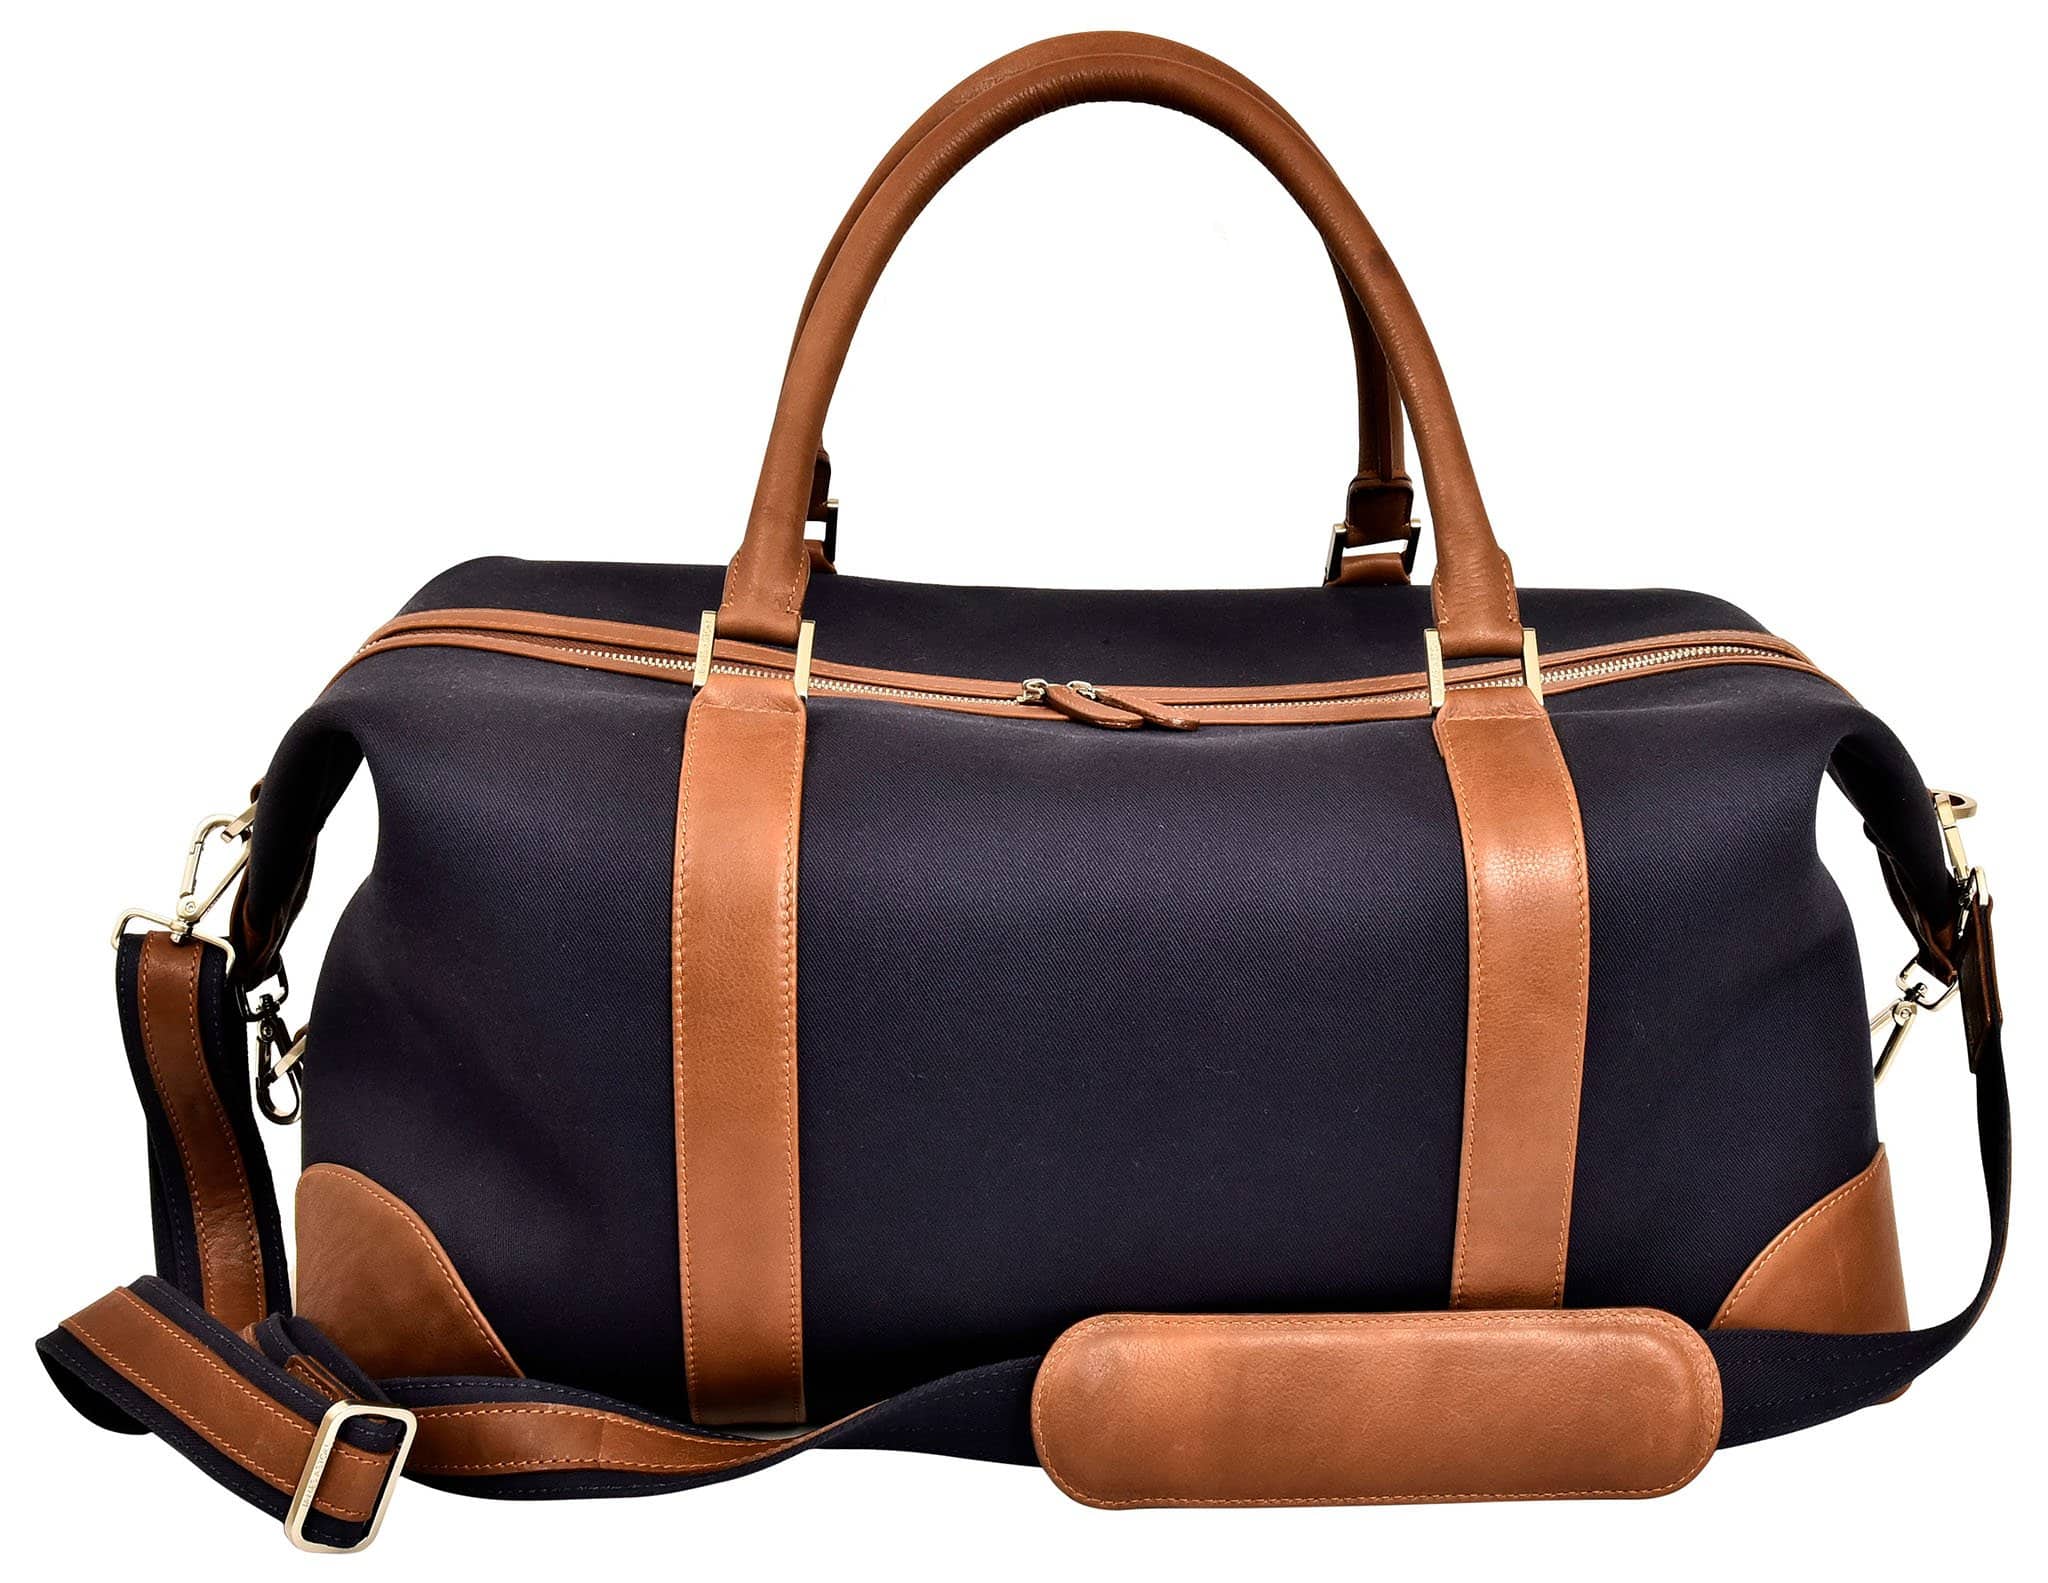 A weekender bag is a travel bag that can carry your clothes, essentials, and a few extras for a weekend trip